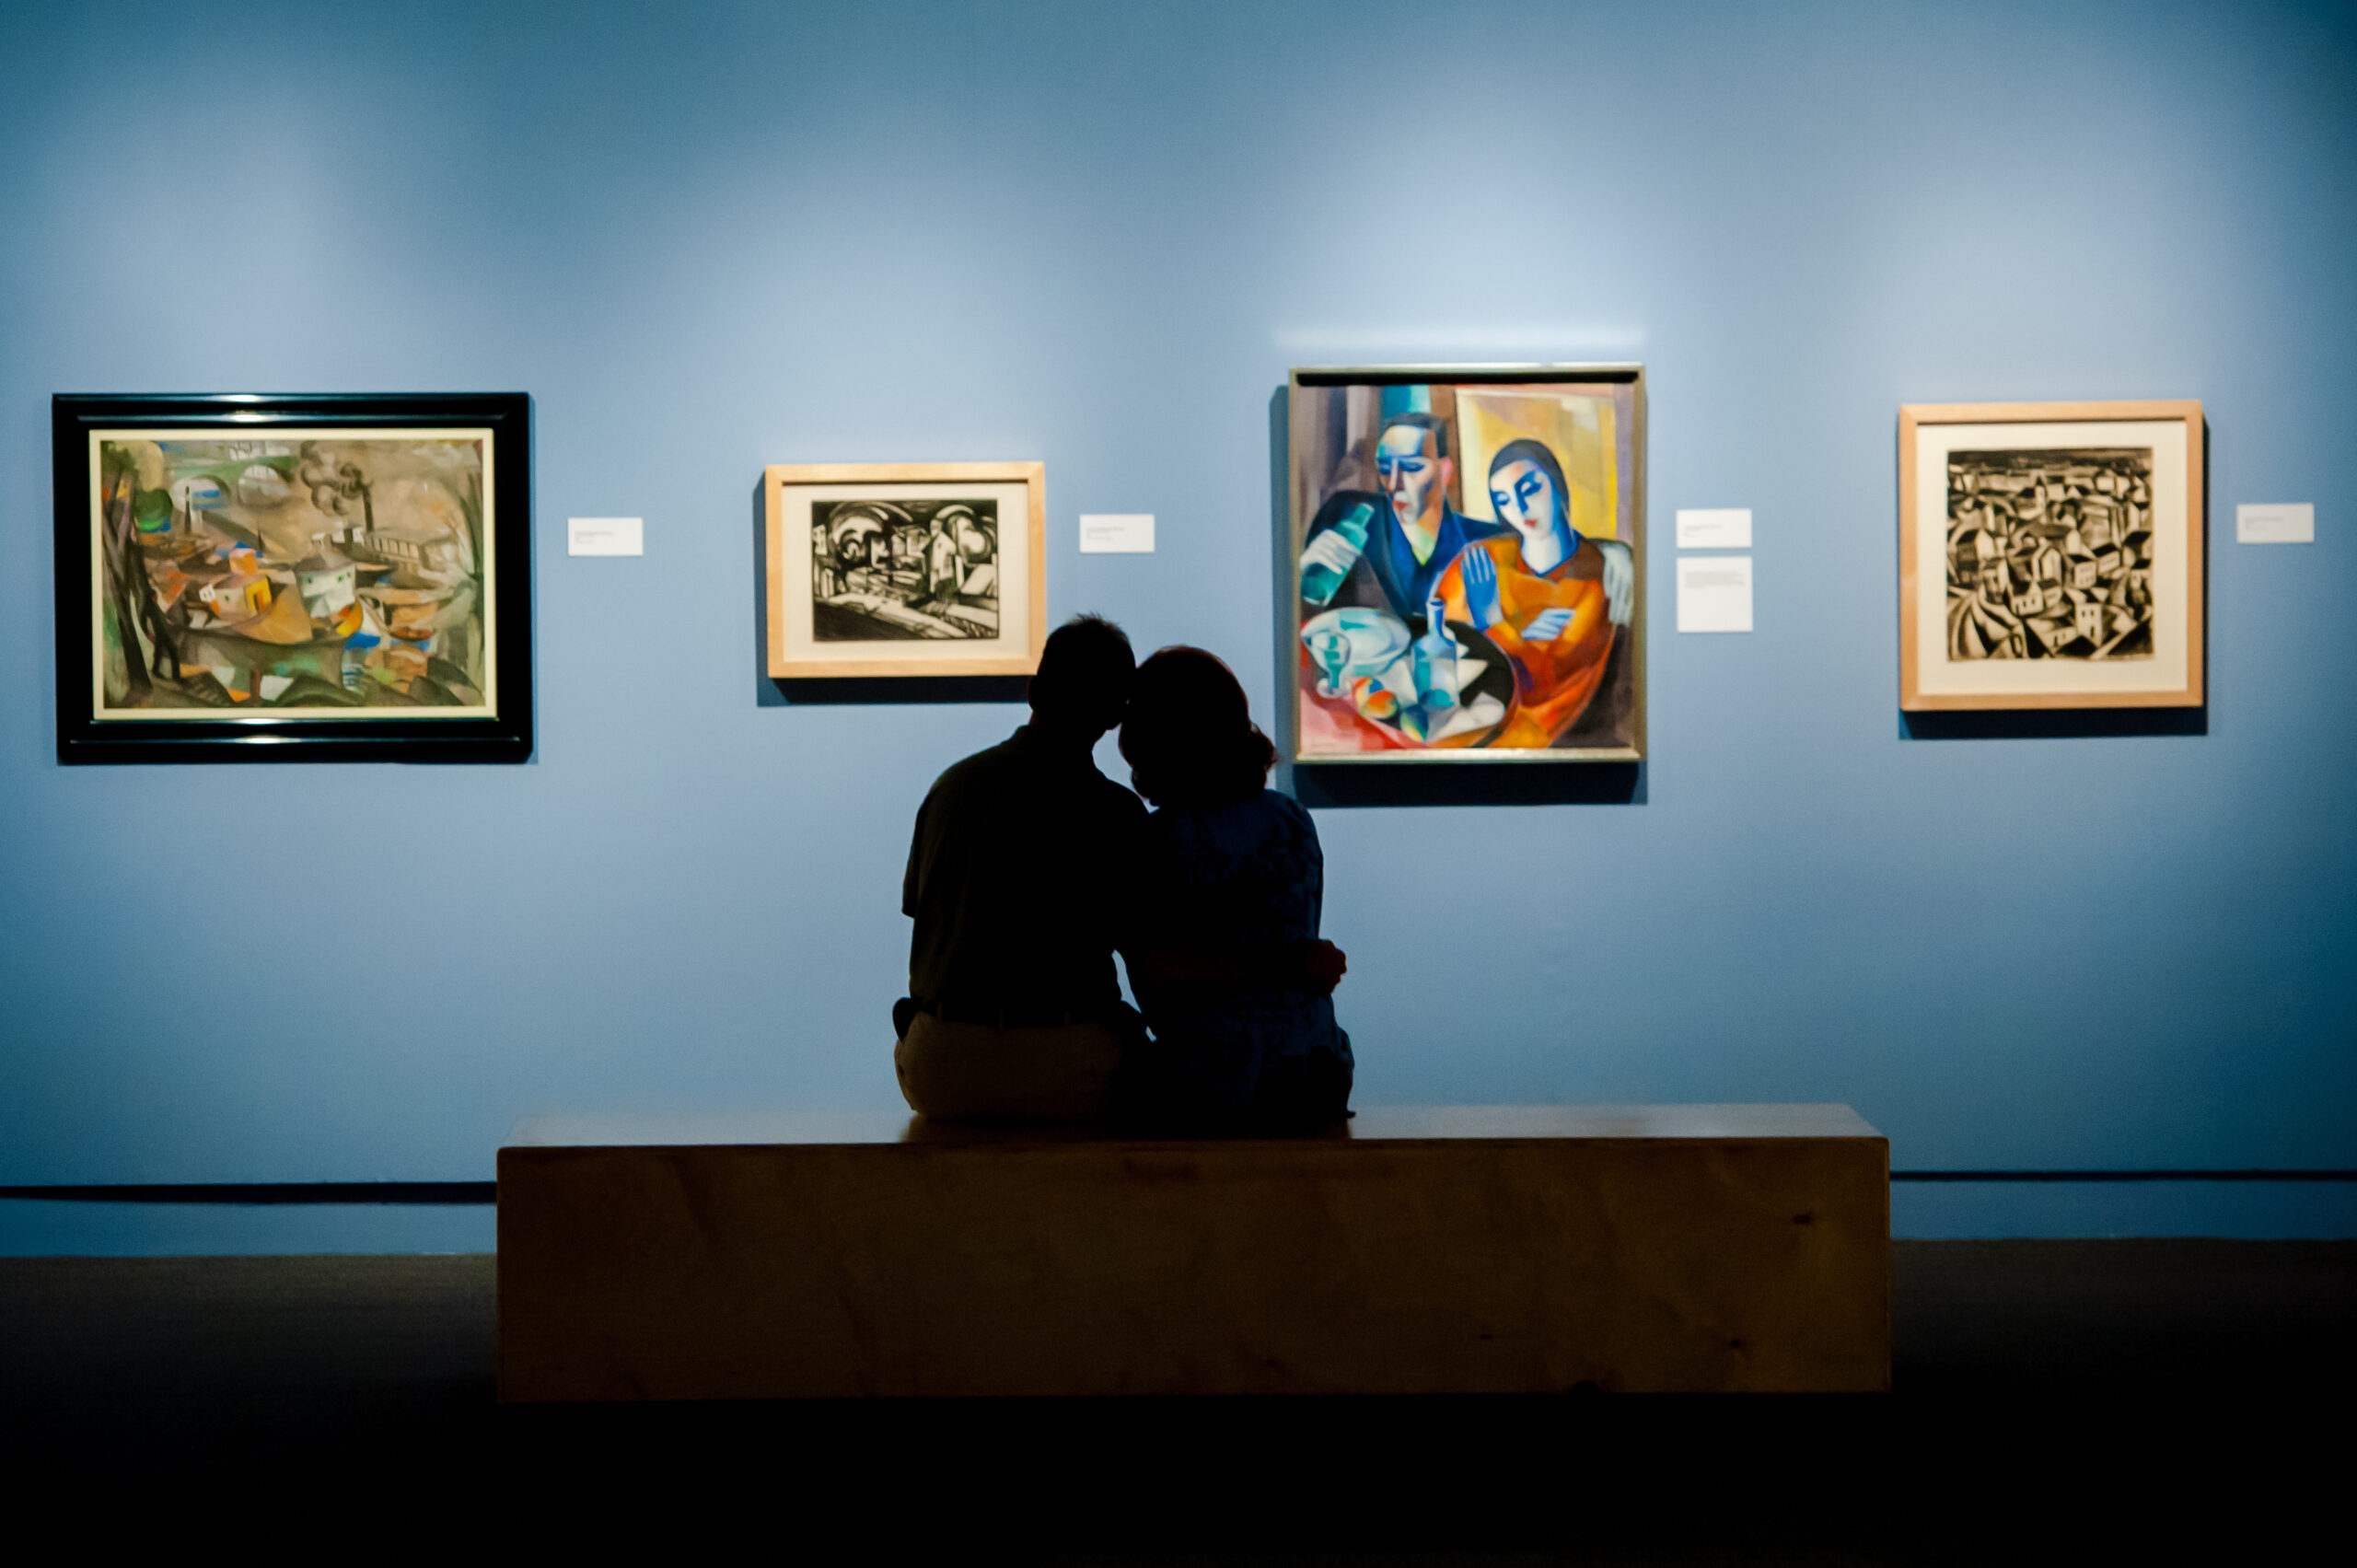 A couple looks at art exhibit at the Foosaner Art Museum in Melbourne, FL